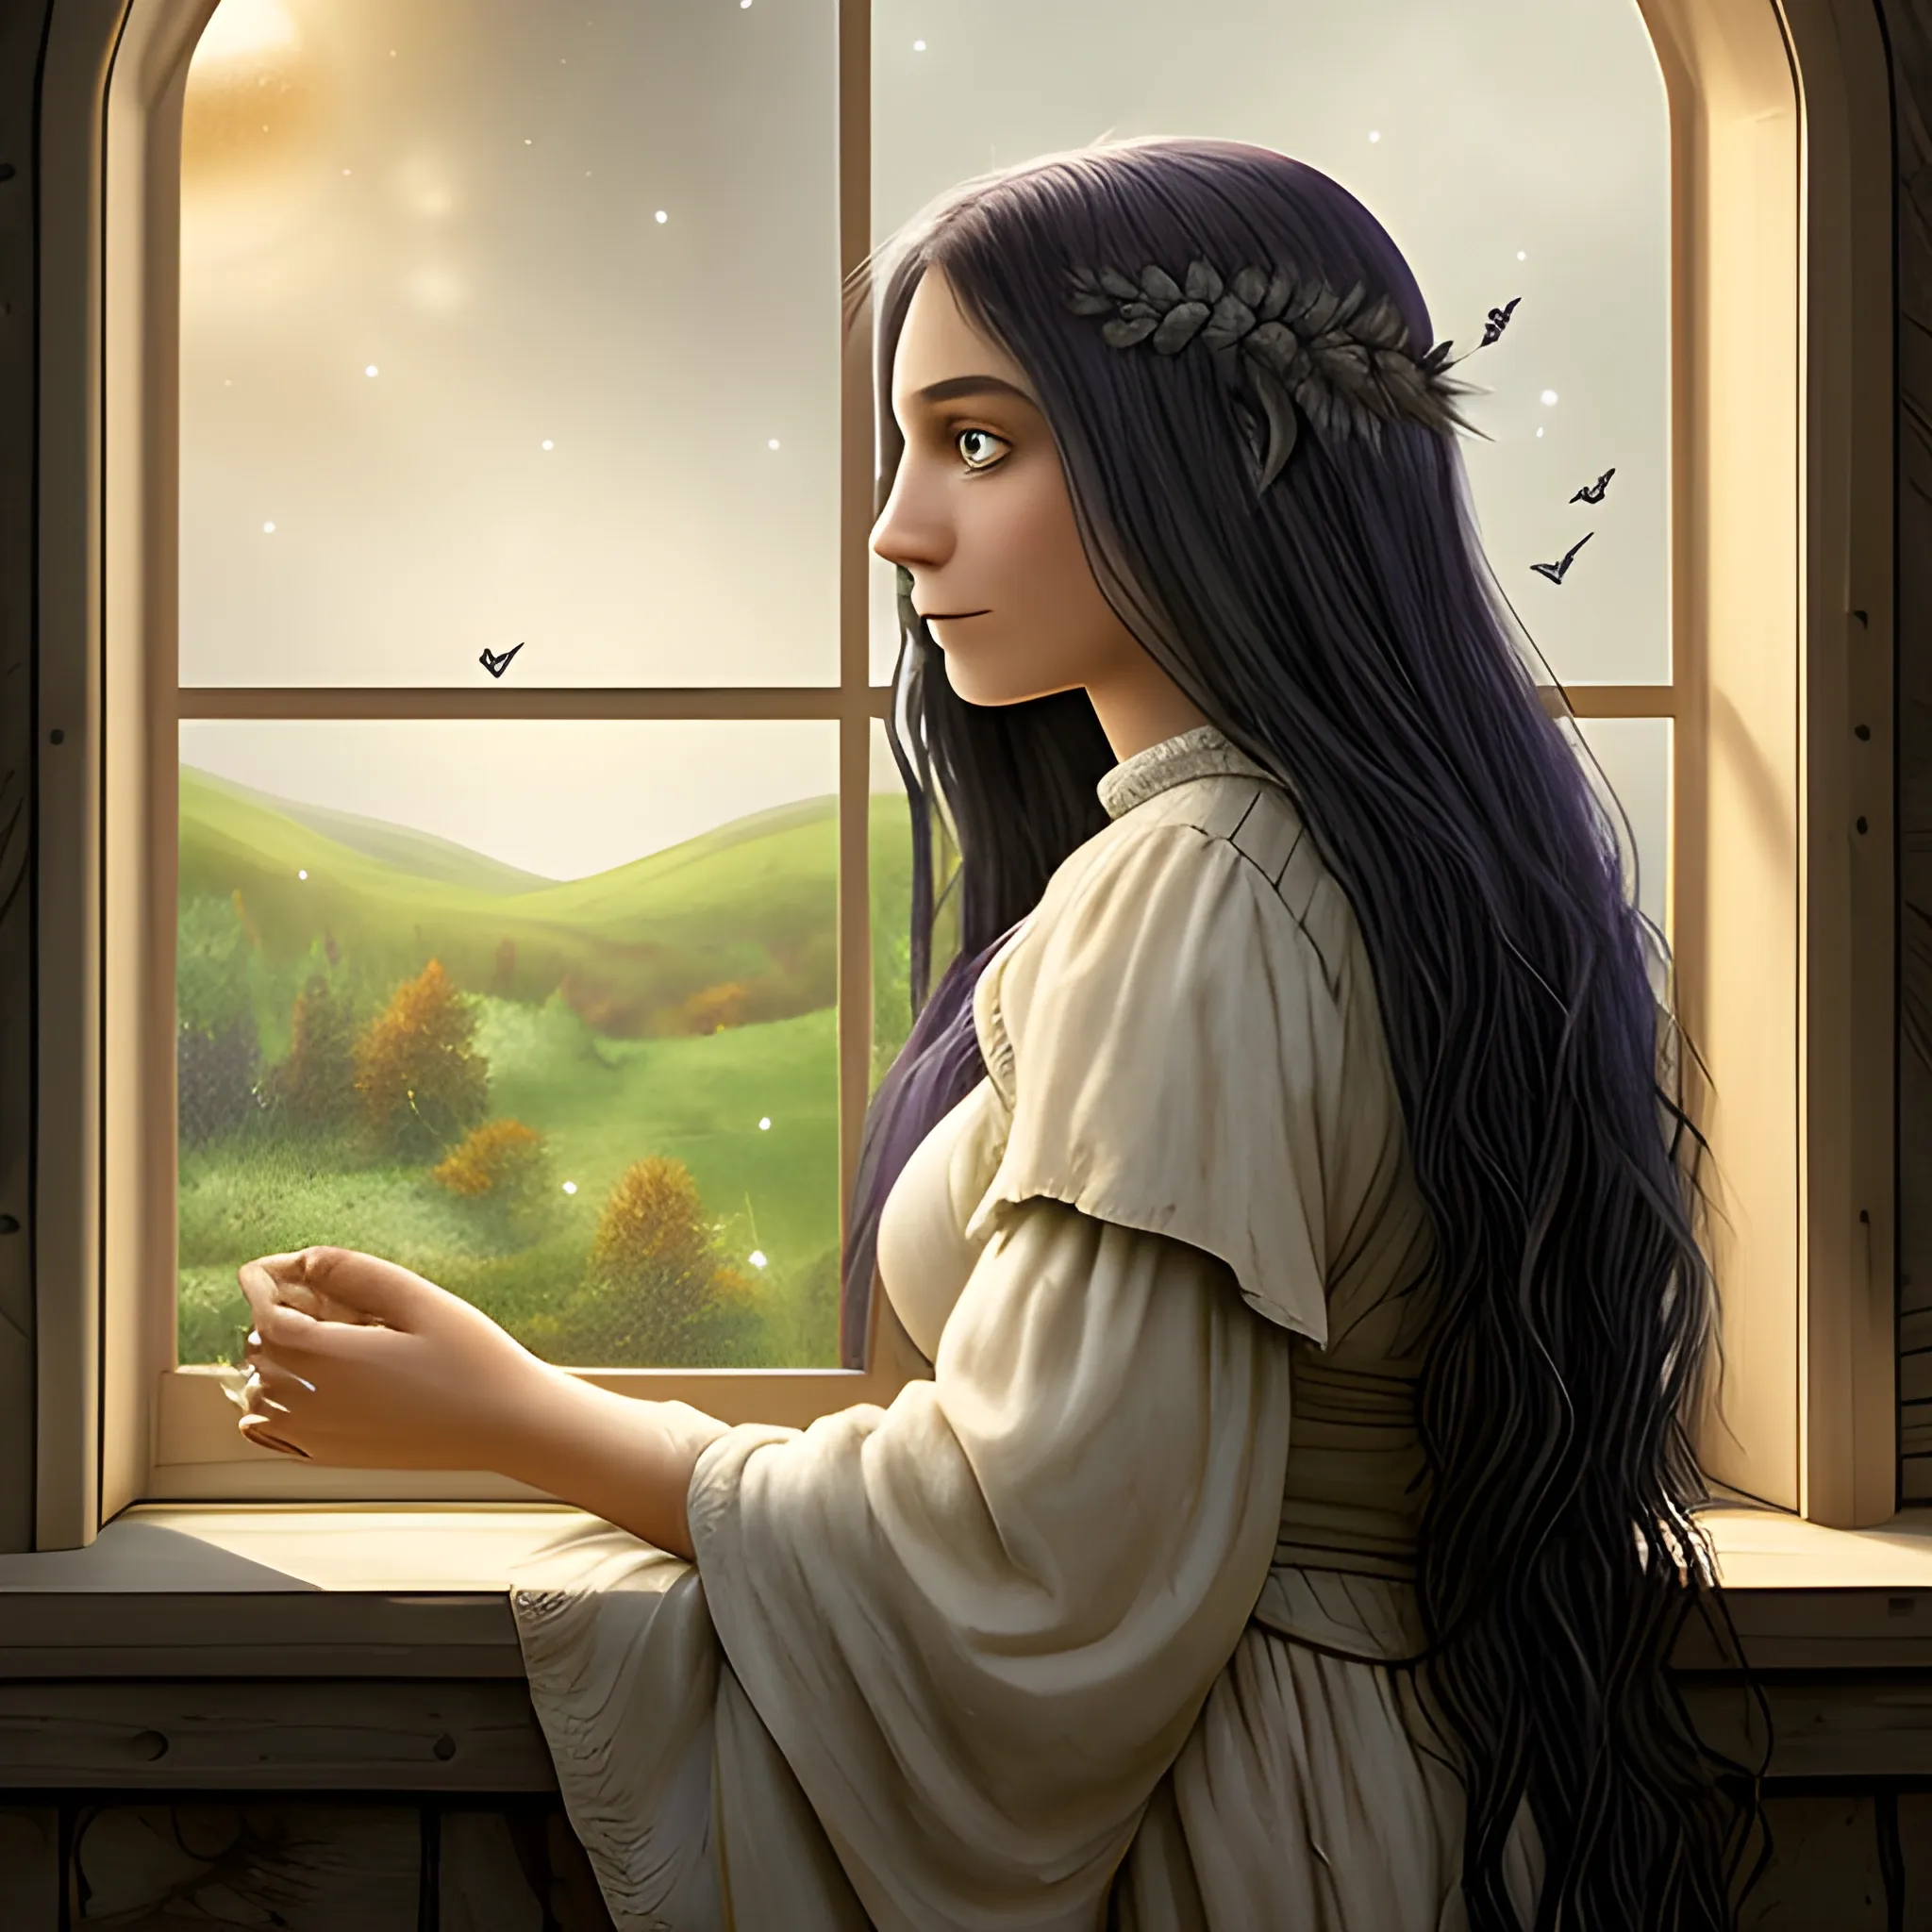 A raven-maned maiden sits by an open window, ivory skin aglow as her doe-brown eyes dream distant, seeing what is, what was, and all that's yet to be under stars just beginning to shimmer.